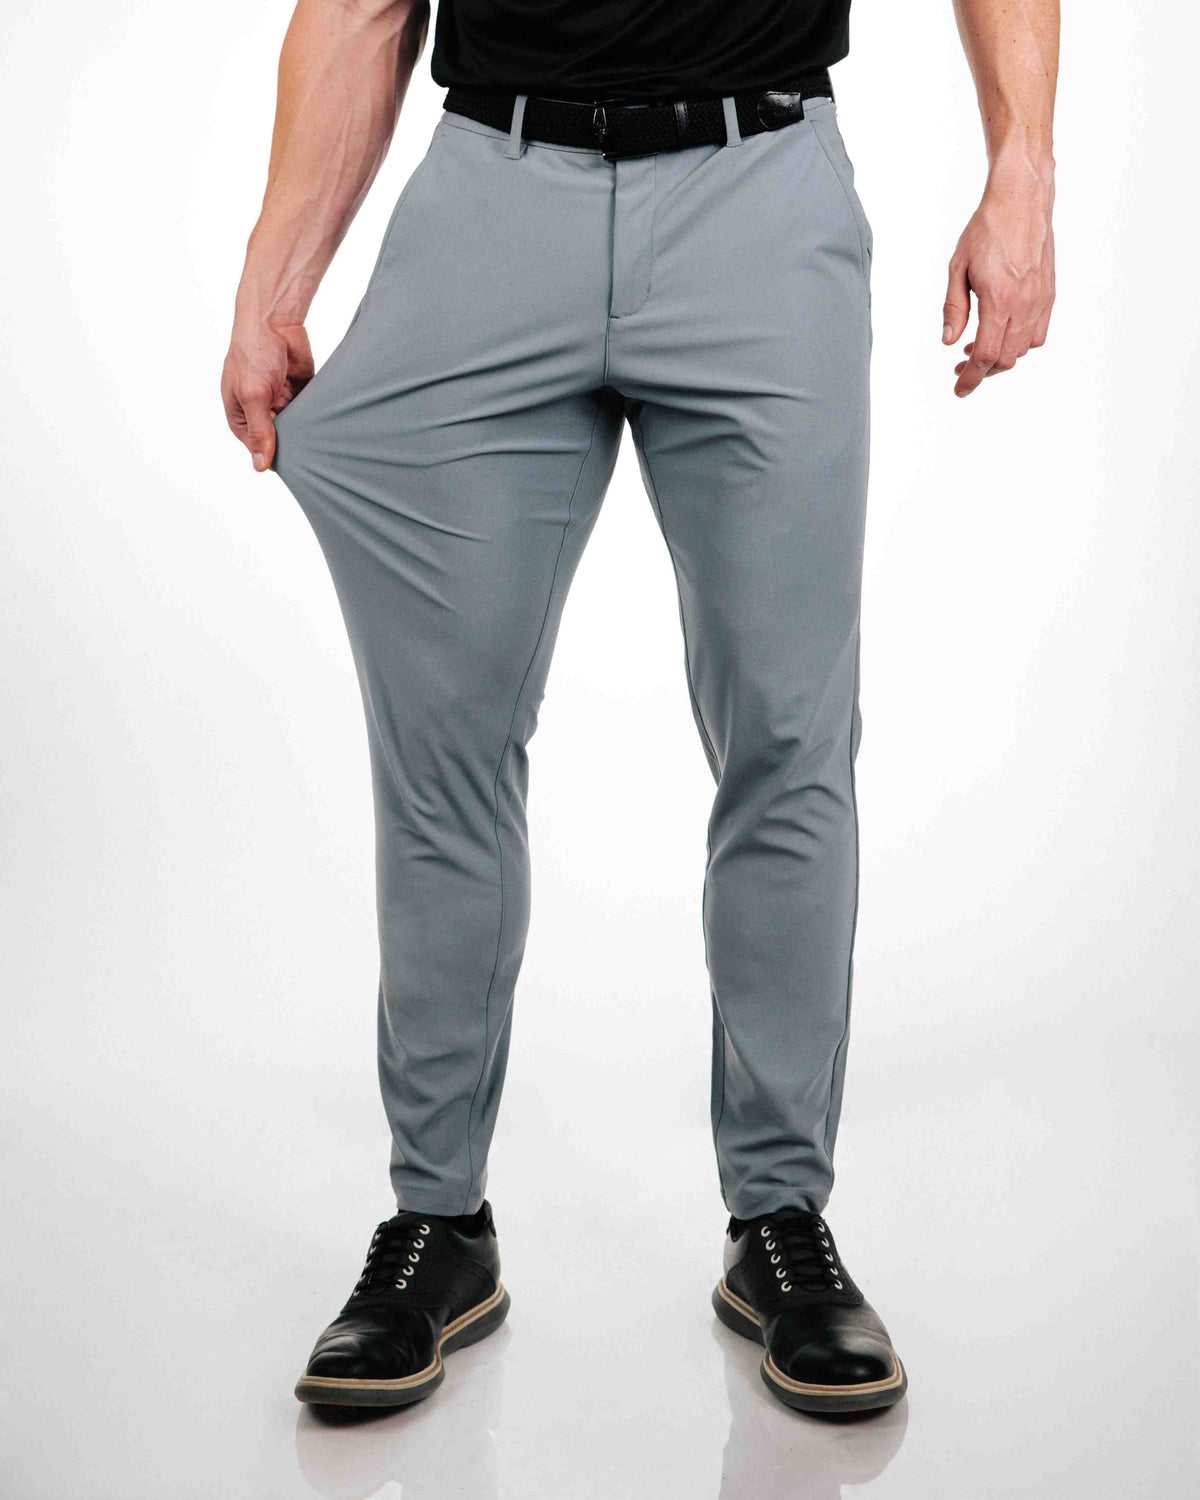 Primo Golf Traditional Pant - Light Gray Stretch